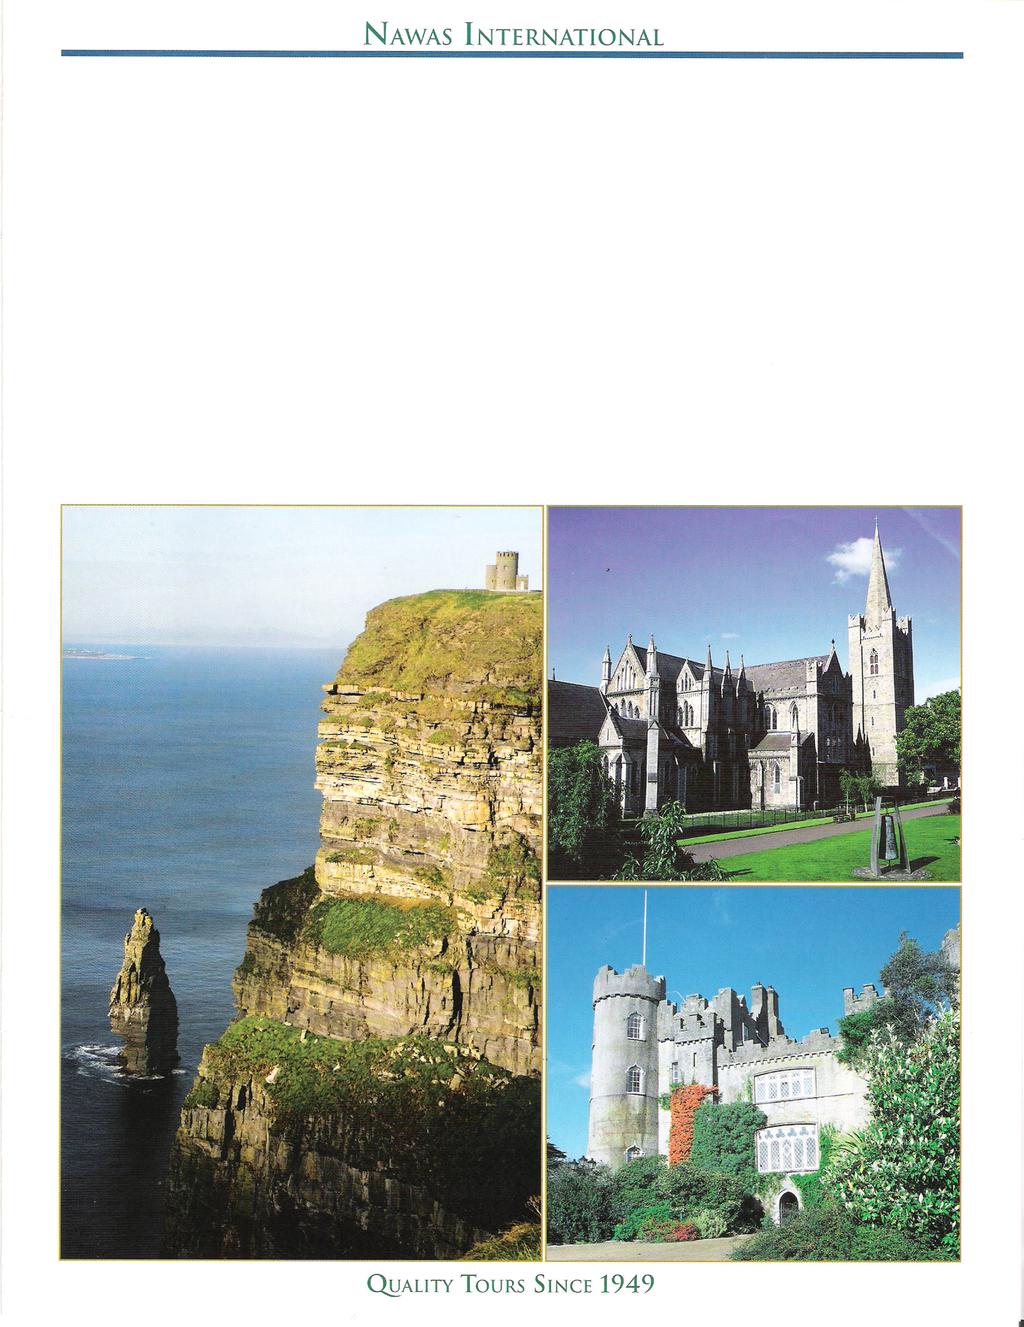 BEST OF IRELAND AND NORTHERN IRELAND 11 Days: March 4-14, 2019 visiting Belfast Derry Knock Galway Connemara Killarney Ring of Kerry Blarney Dublin hosted by